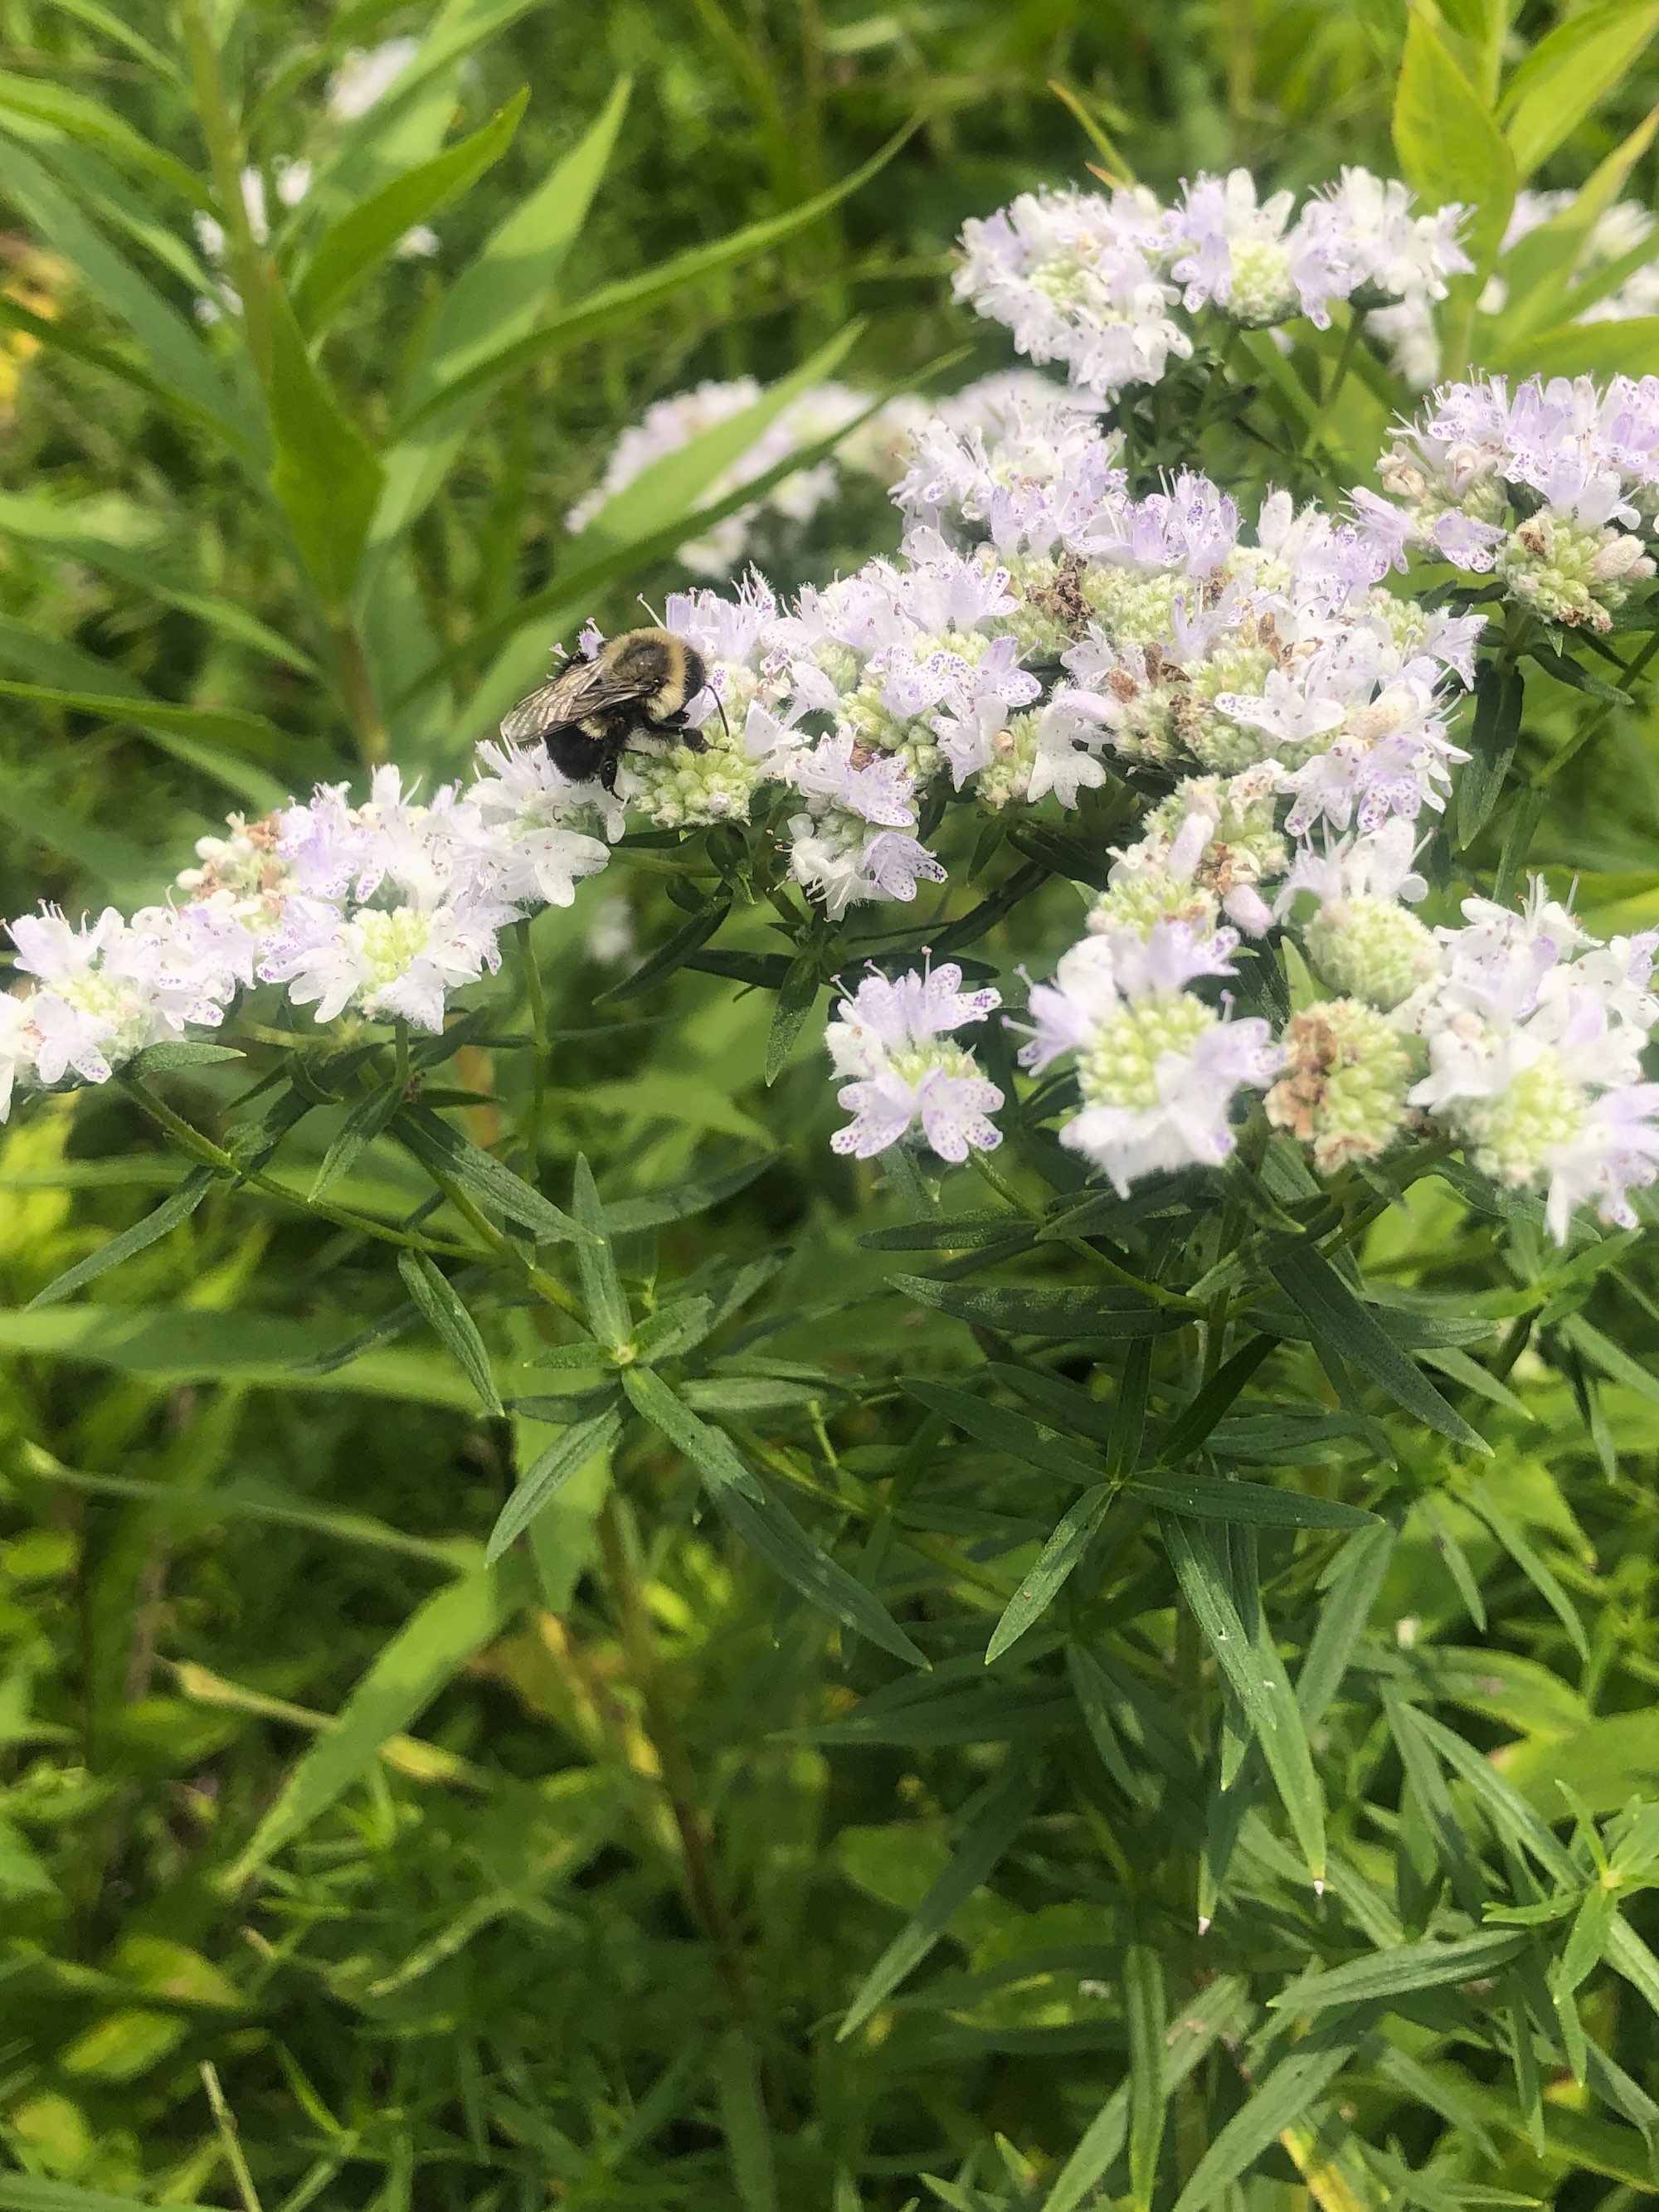 Common Mountain Mint overlooking Dawley Conservancy in Madison, Wisconsin on July 22, 2021.